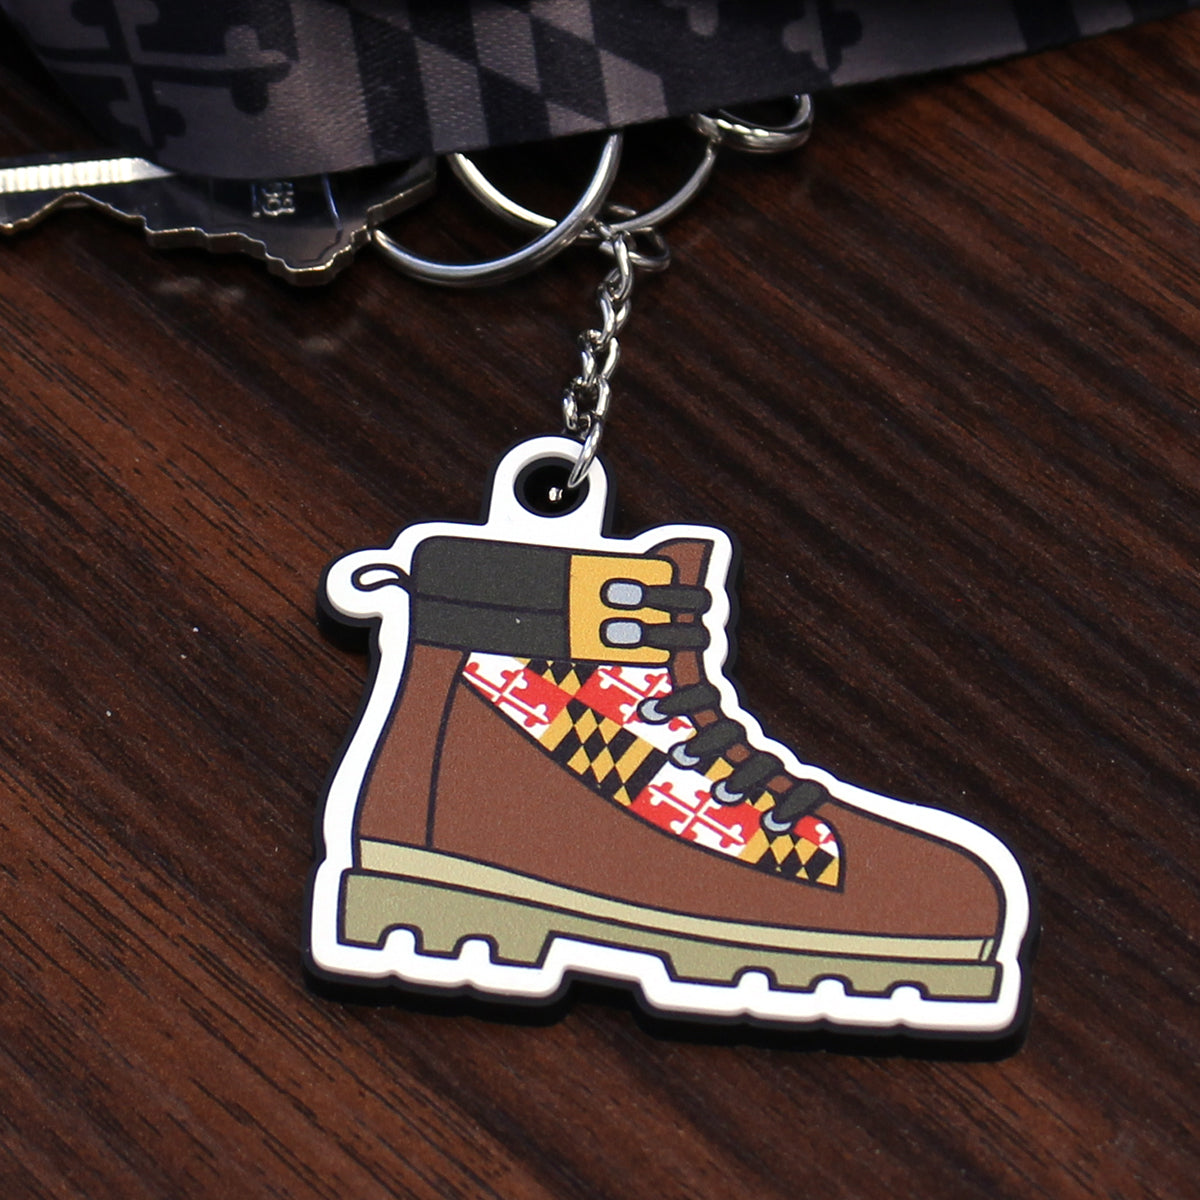 Hiking Boot w/ Maryland Flag / Key Chain - Route One Apparel